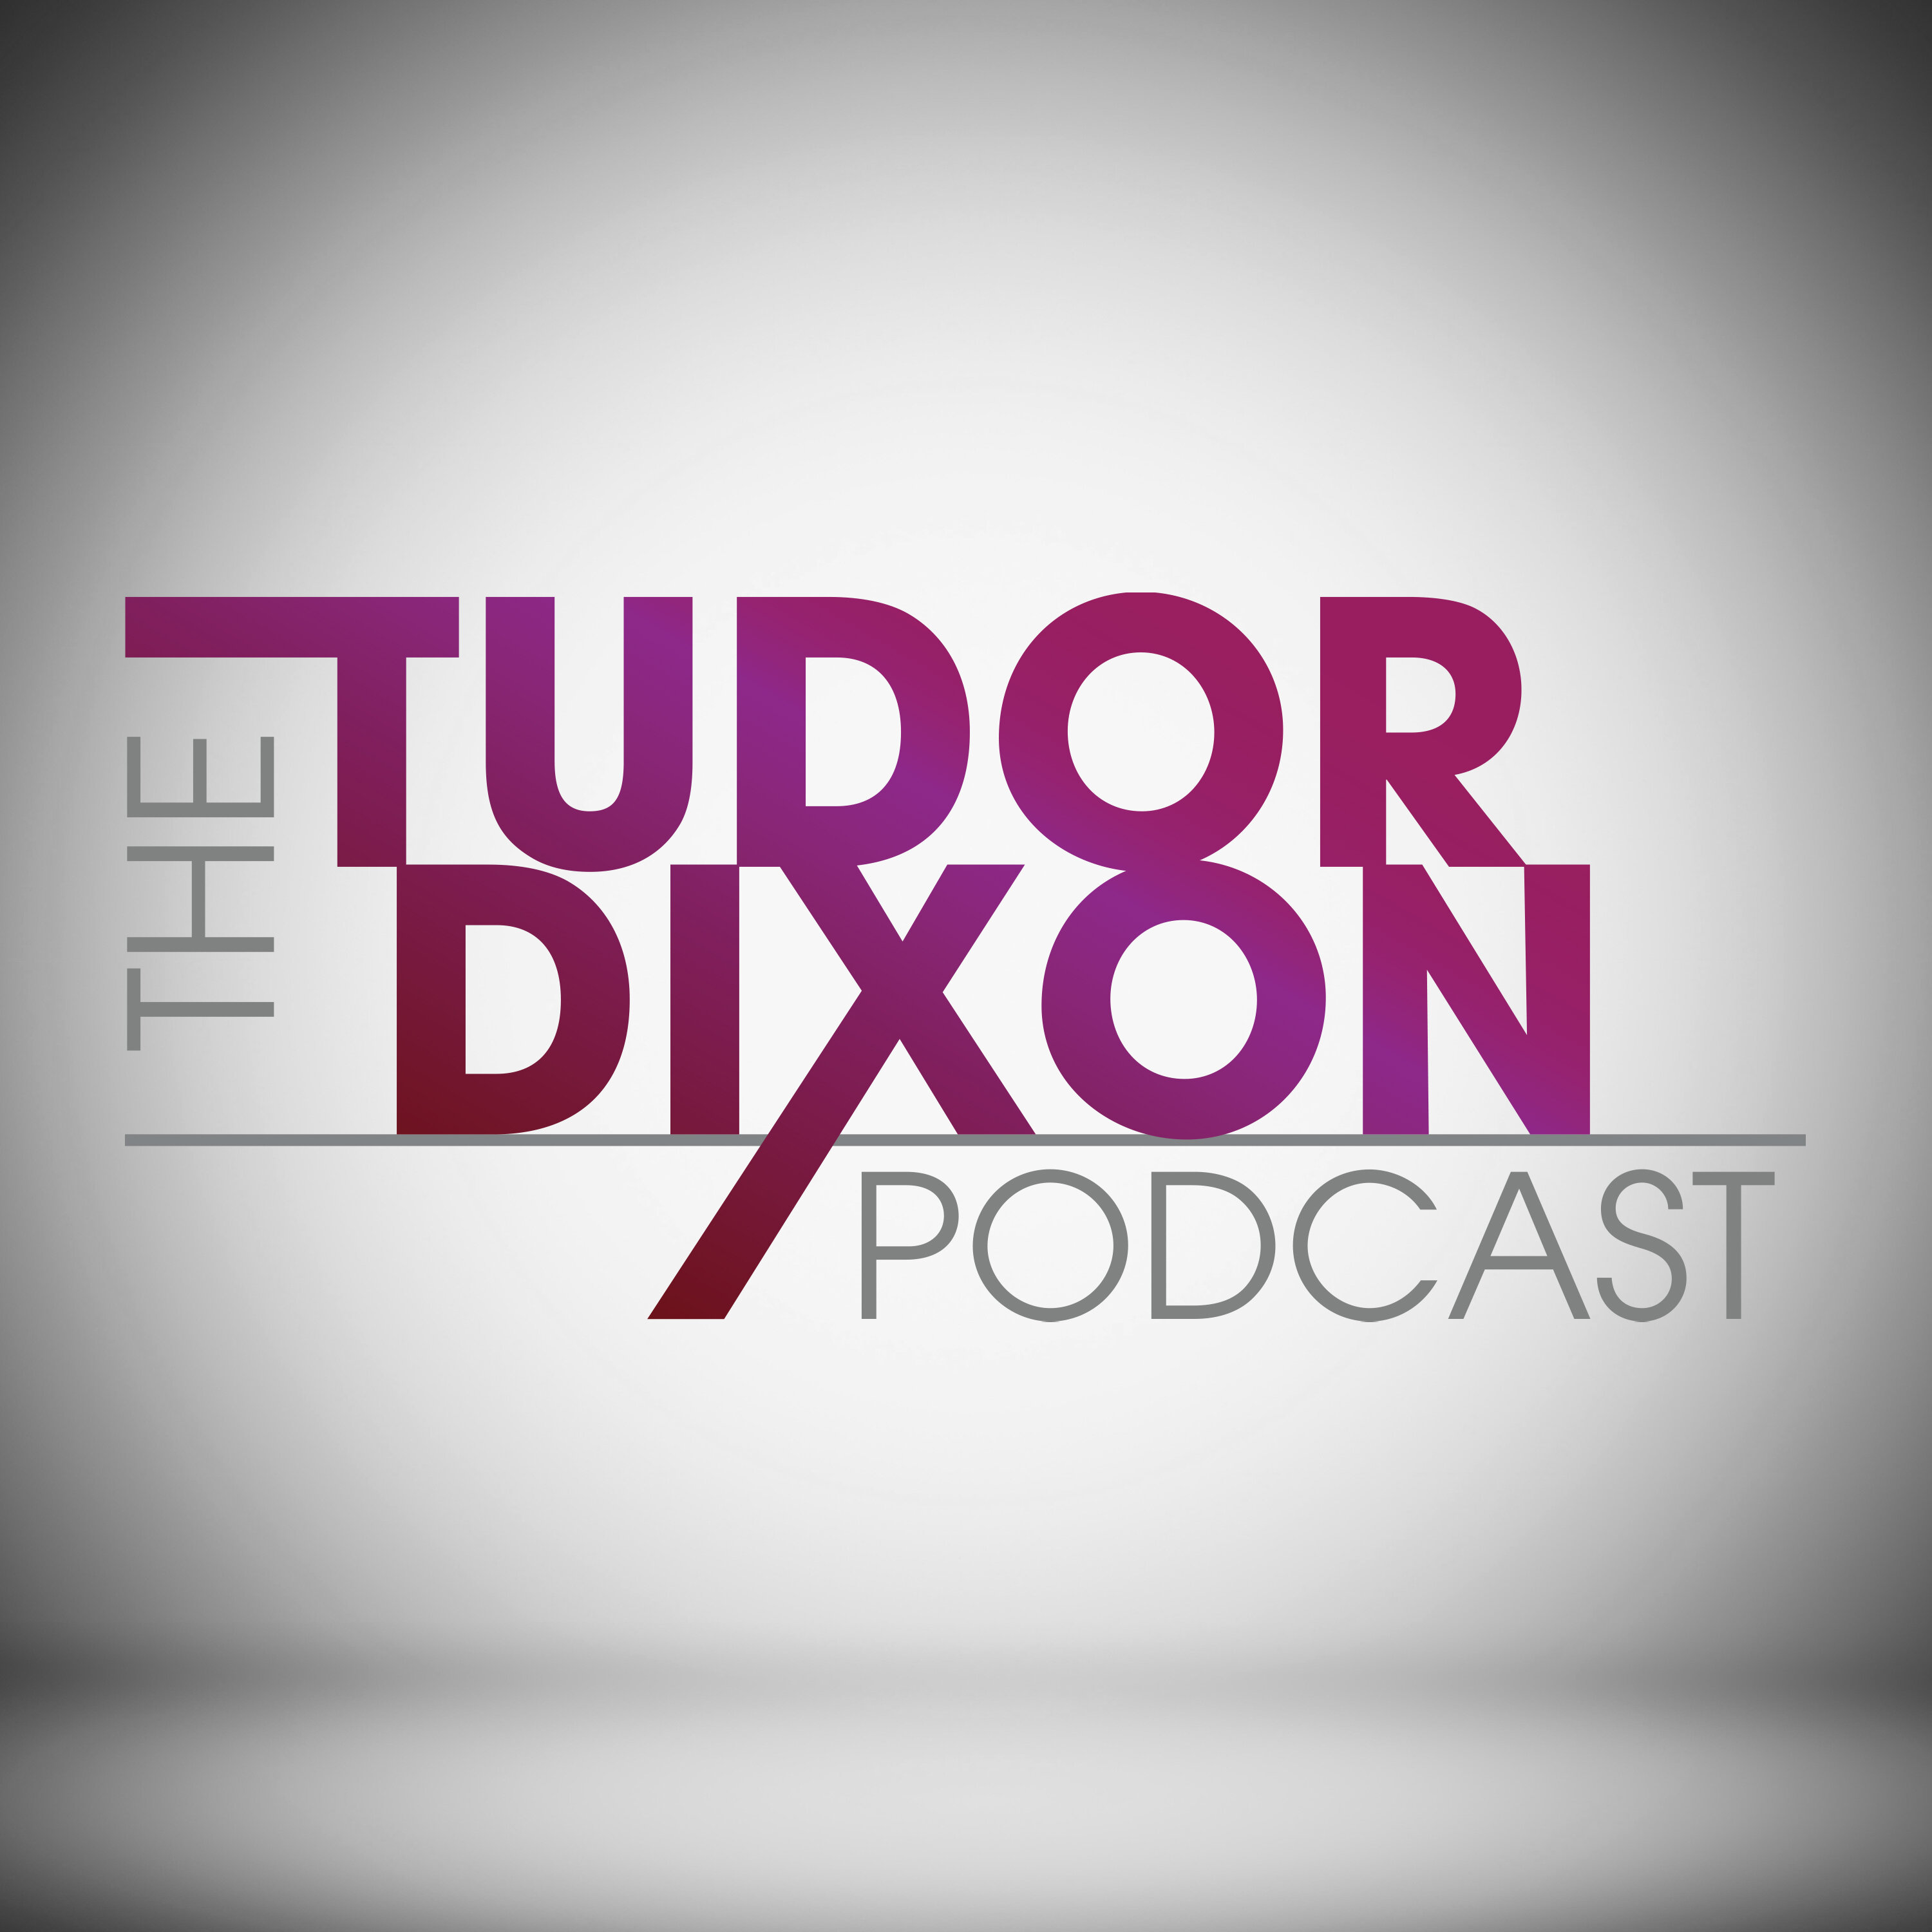 The Tudor Dixon Podcast: The True Cost of Illegal Immigration with Sabine Durden-Coulter